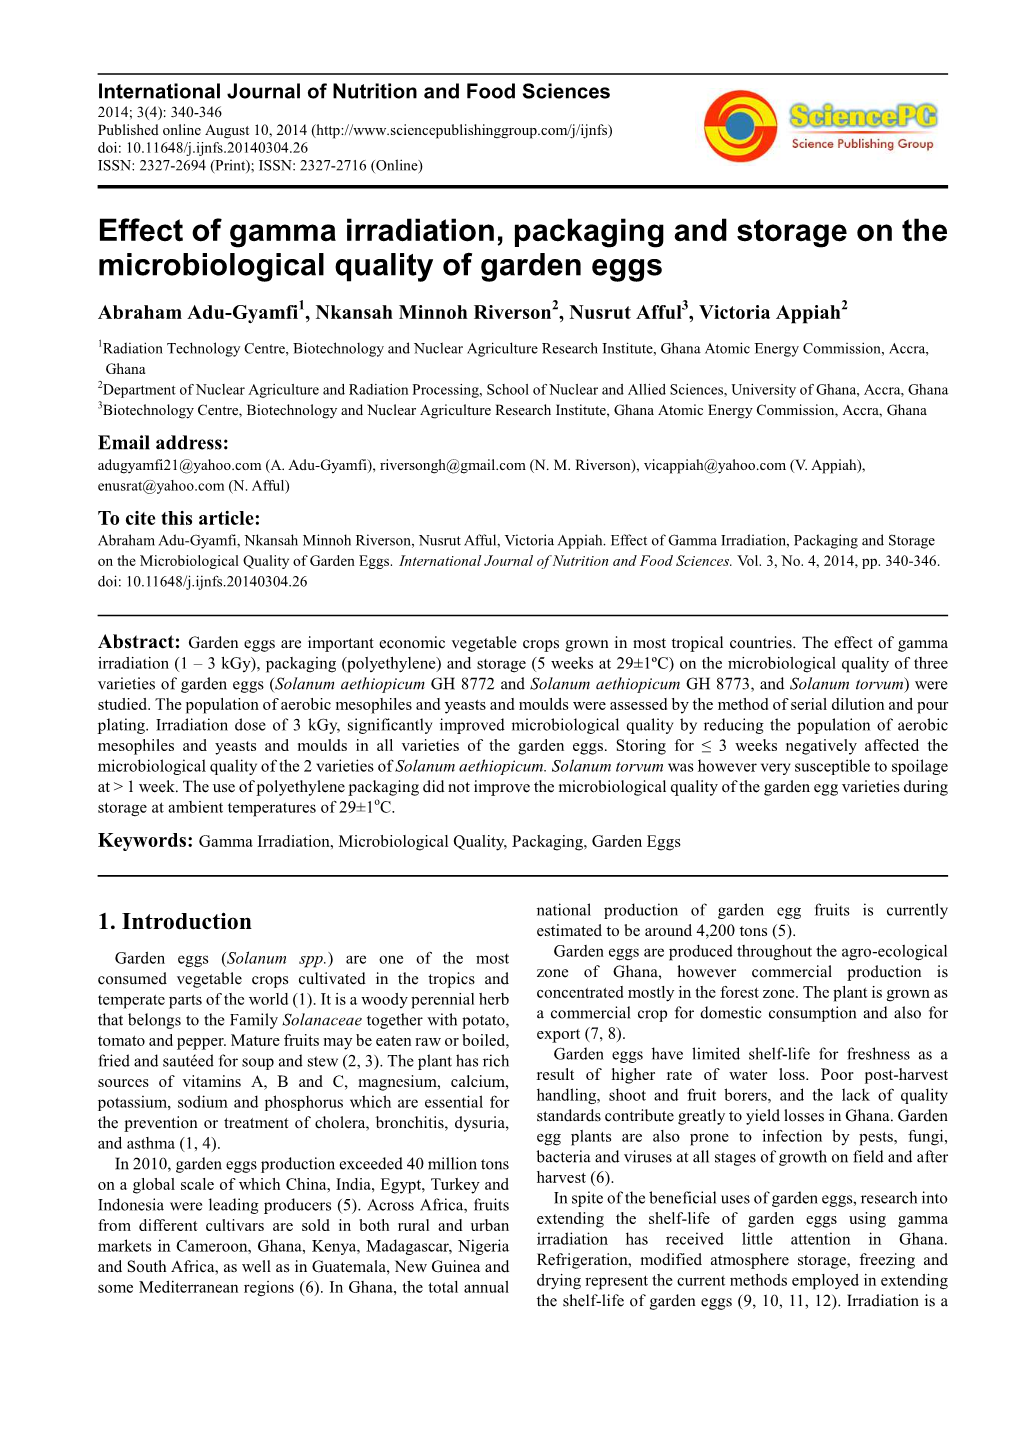 Effect of Gamma Irradiation, Packaging and Storage on the Microbiological Quality of Garden Eggs